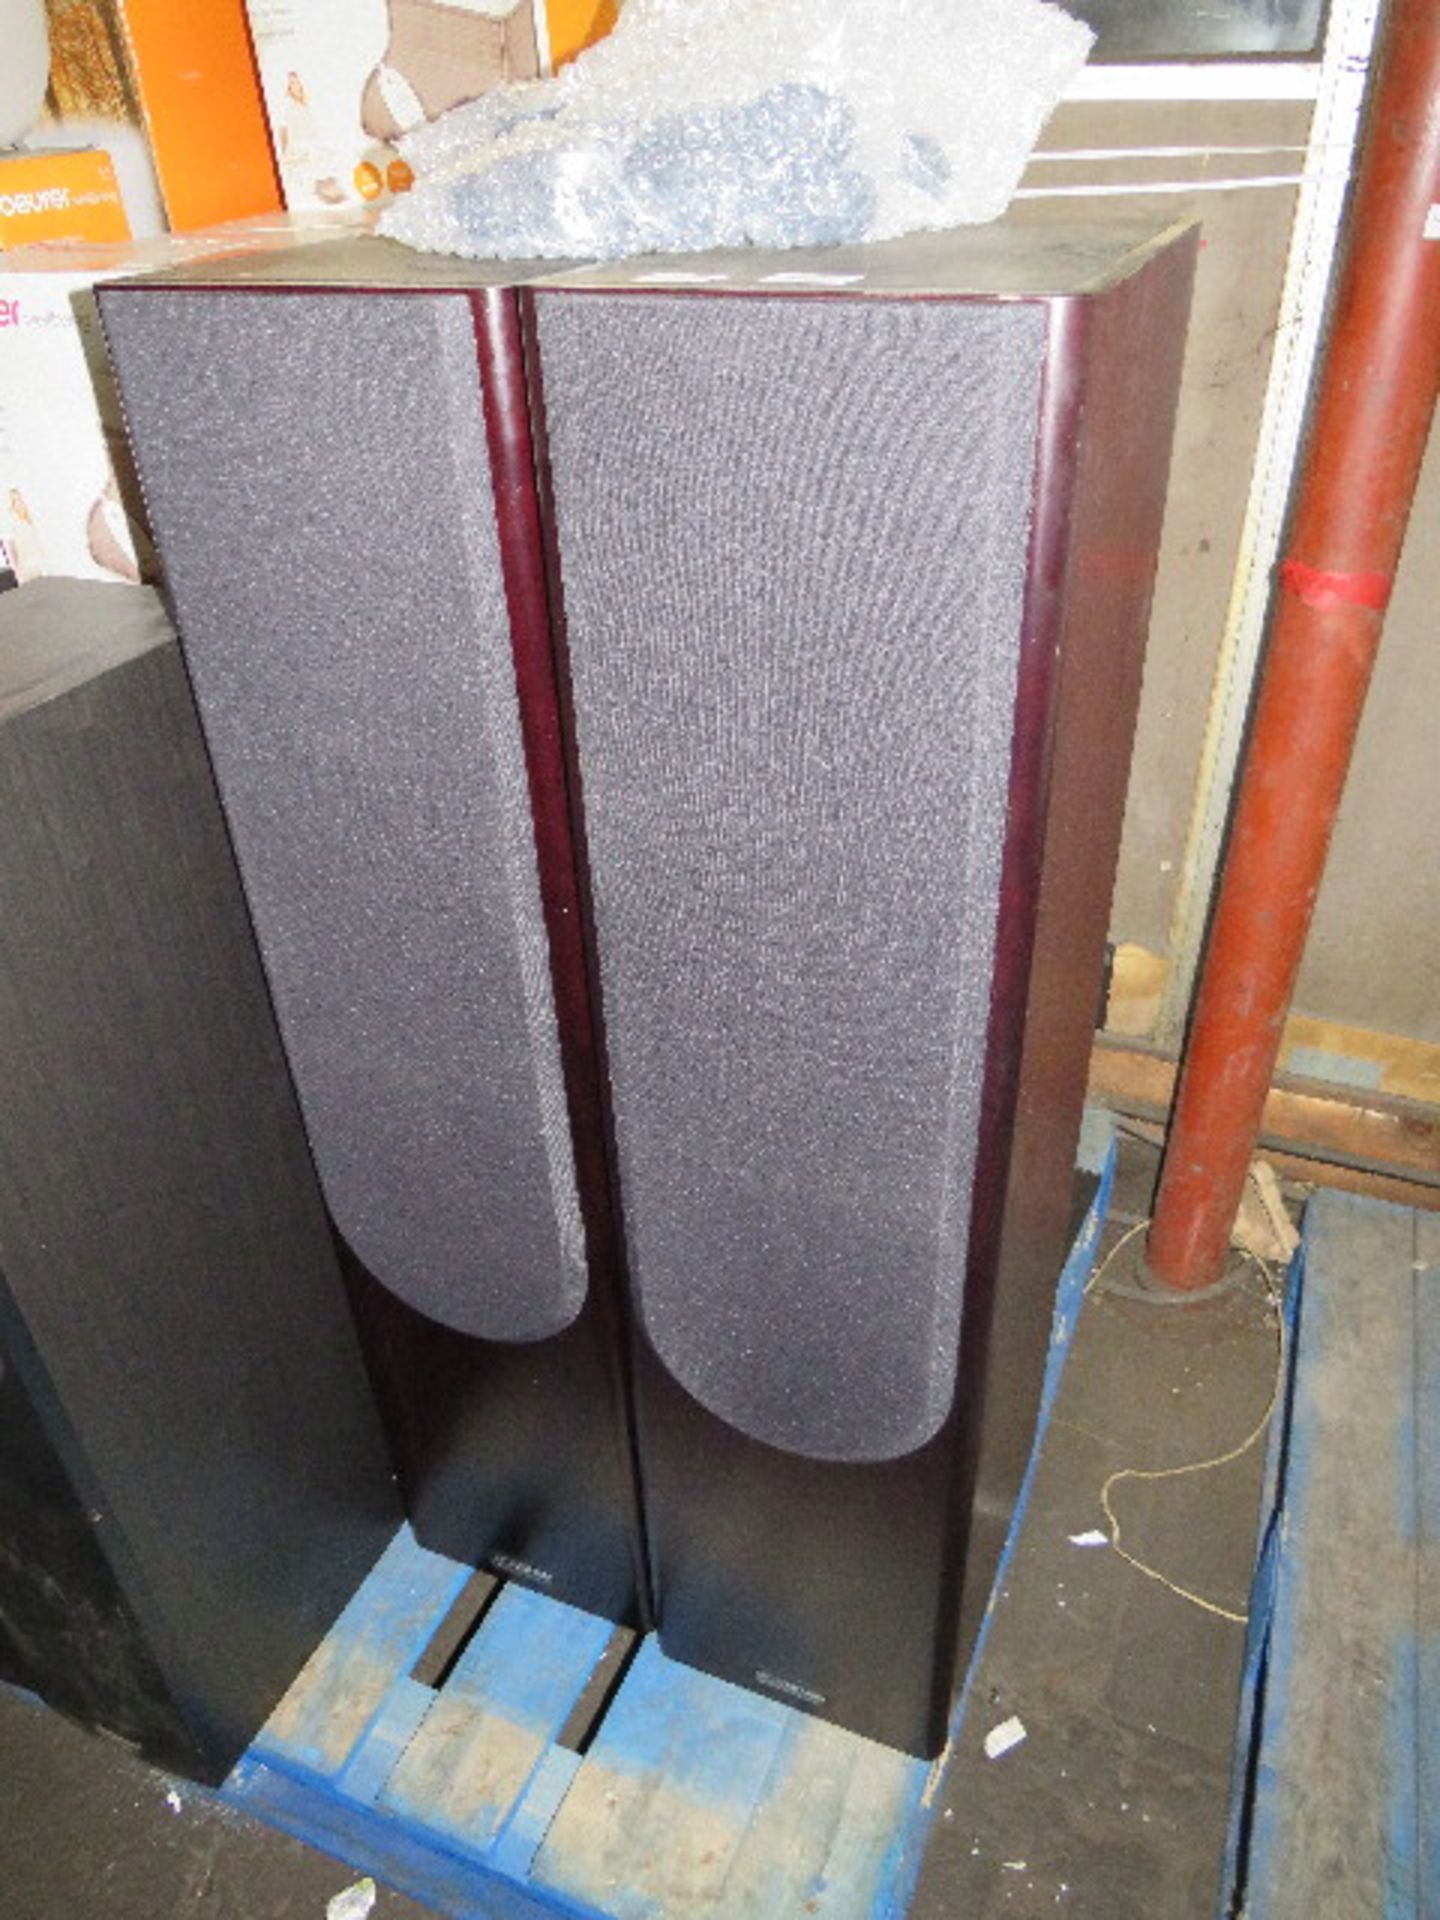 Monitor Audio Gold 300 (Dark Walnut) Floorstanding speakers, comes with feet, has a couple of